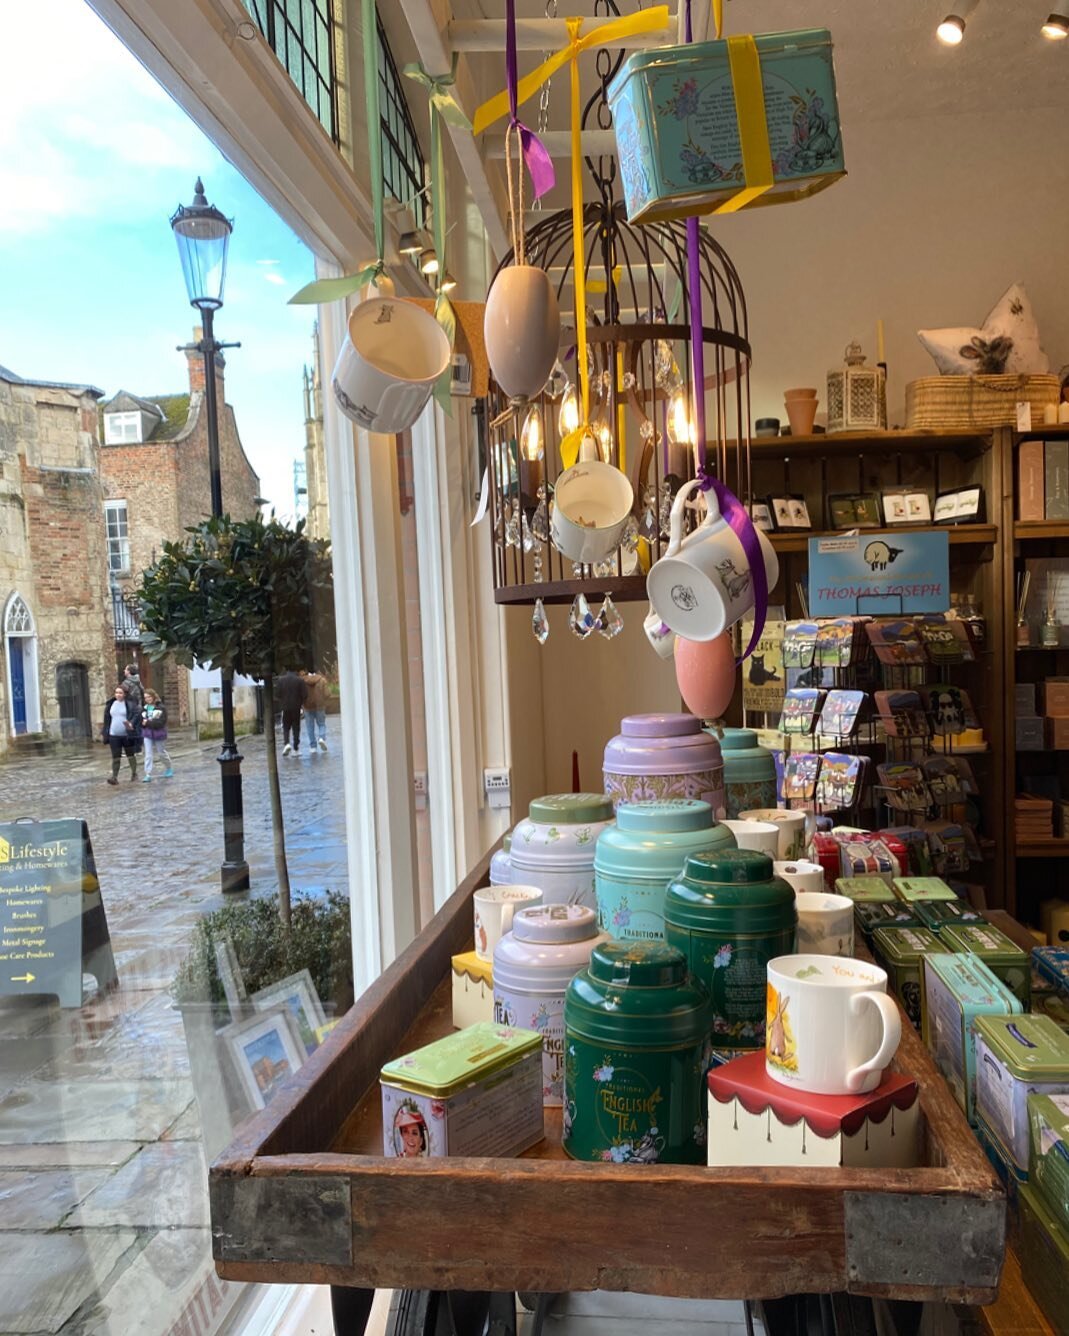 Good morning!

We&rsquo;re open until 3pm today. Come say hi 👋 

Happy Sunday.

#thekandletree #thecandletreegloucester #visitgloucester #campaignshopindependent #campaignshopsmall #gloucester #sundaymorningview